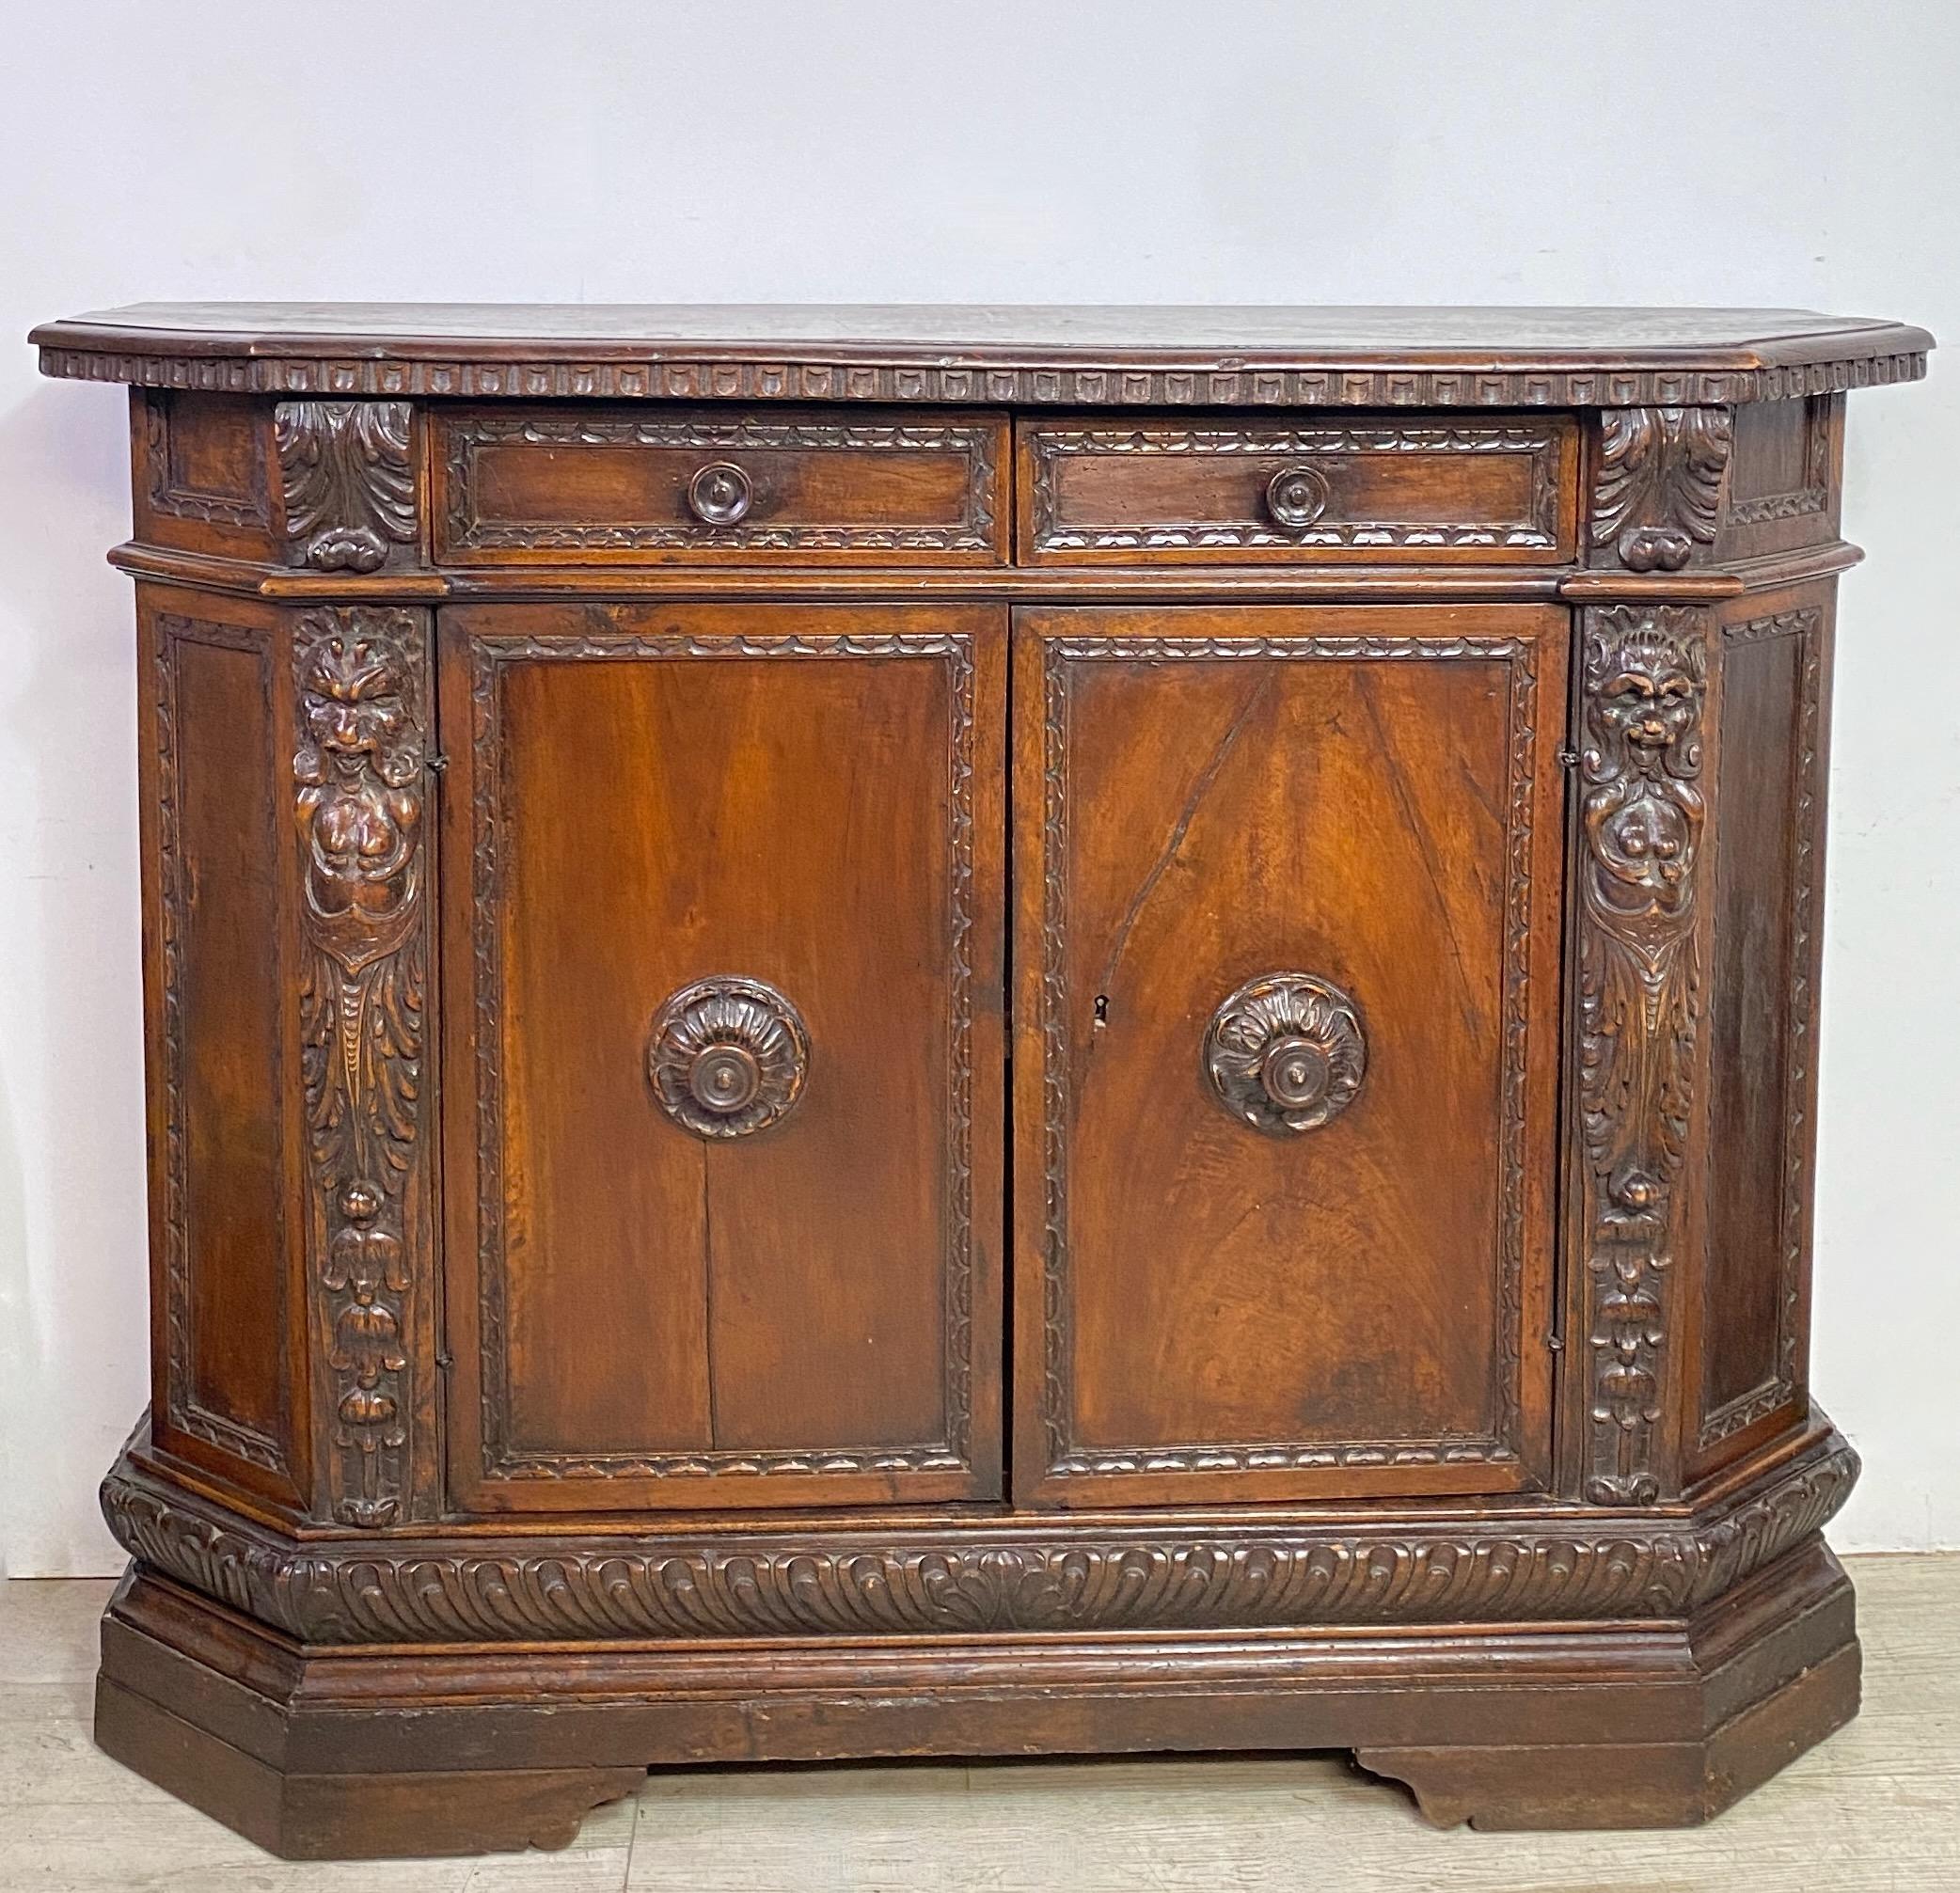 An extraordinary Tuscan Renaissance period walnut credenza in superb original condition.
Hand carved, warm rich original patina, having two drawers and a single interior shelf.
Italy, 17th century.